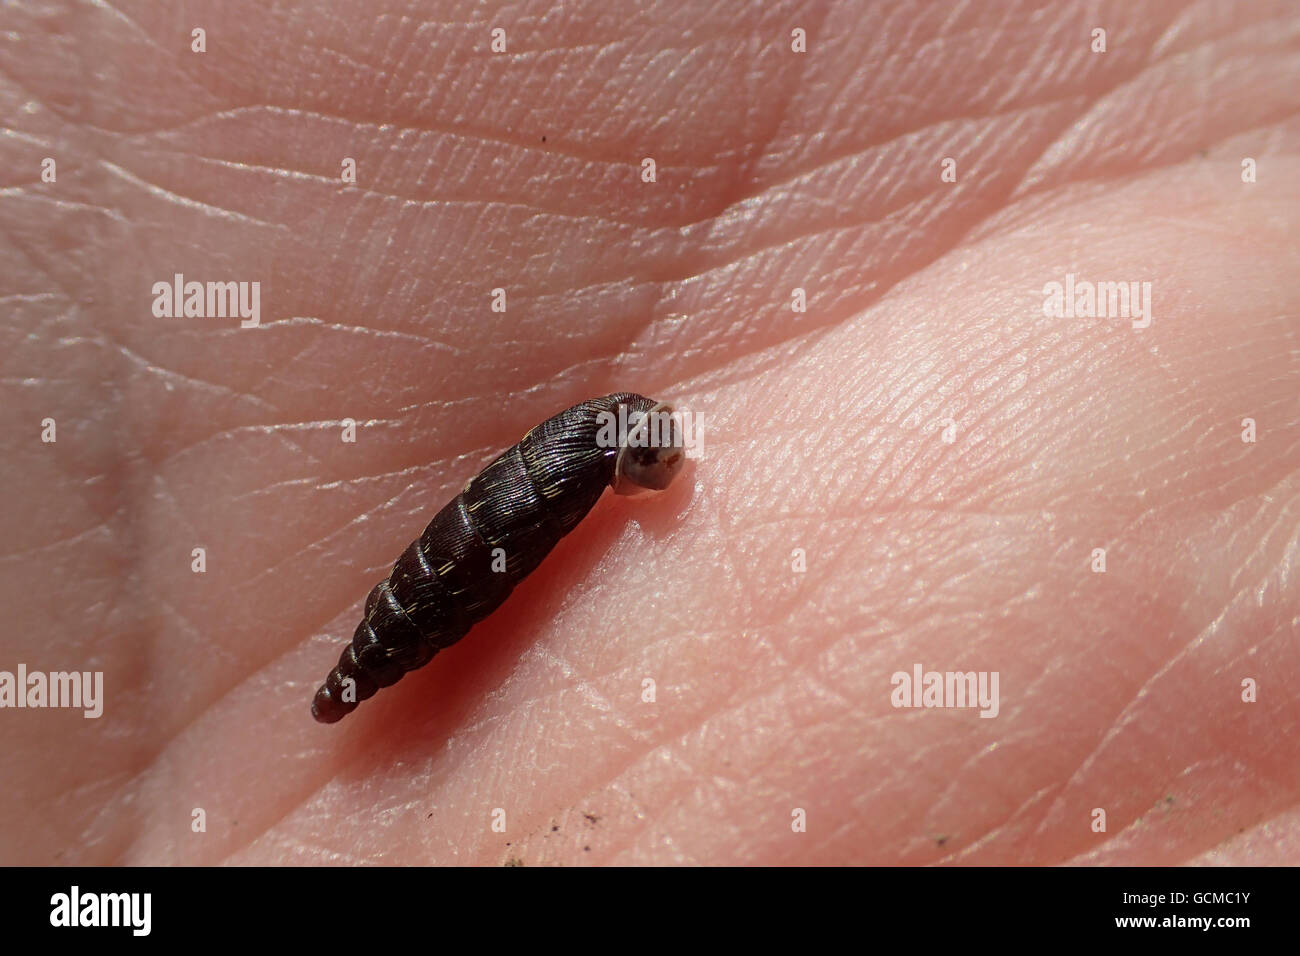 Side view of plaited door snail (Marpessa (= Cochlodina) laminata) on the palm of the photographer's hand Stock Photo